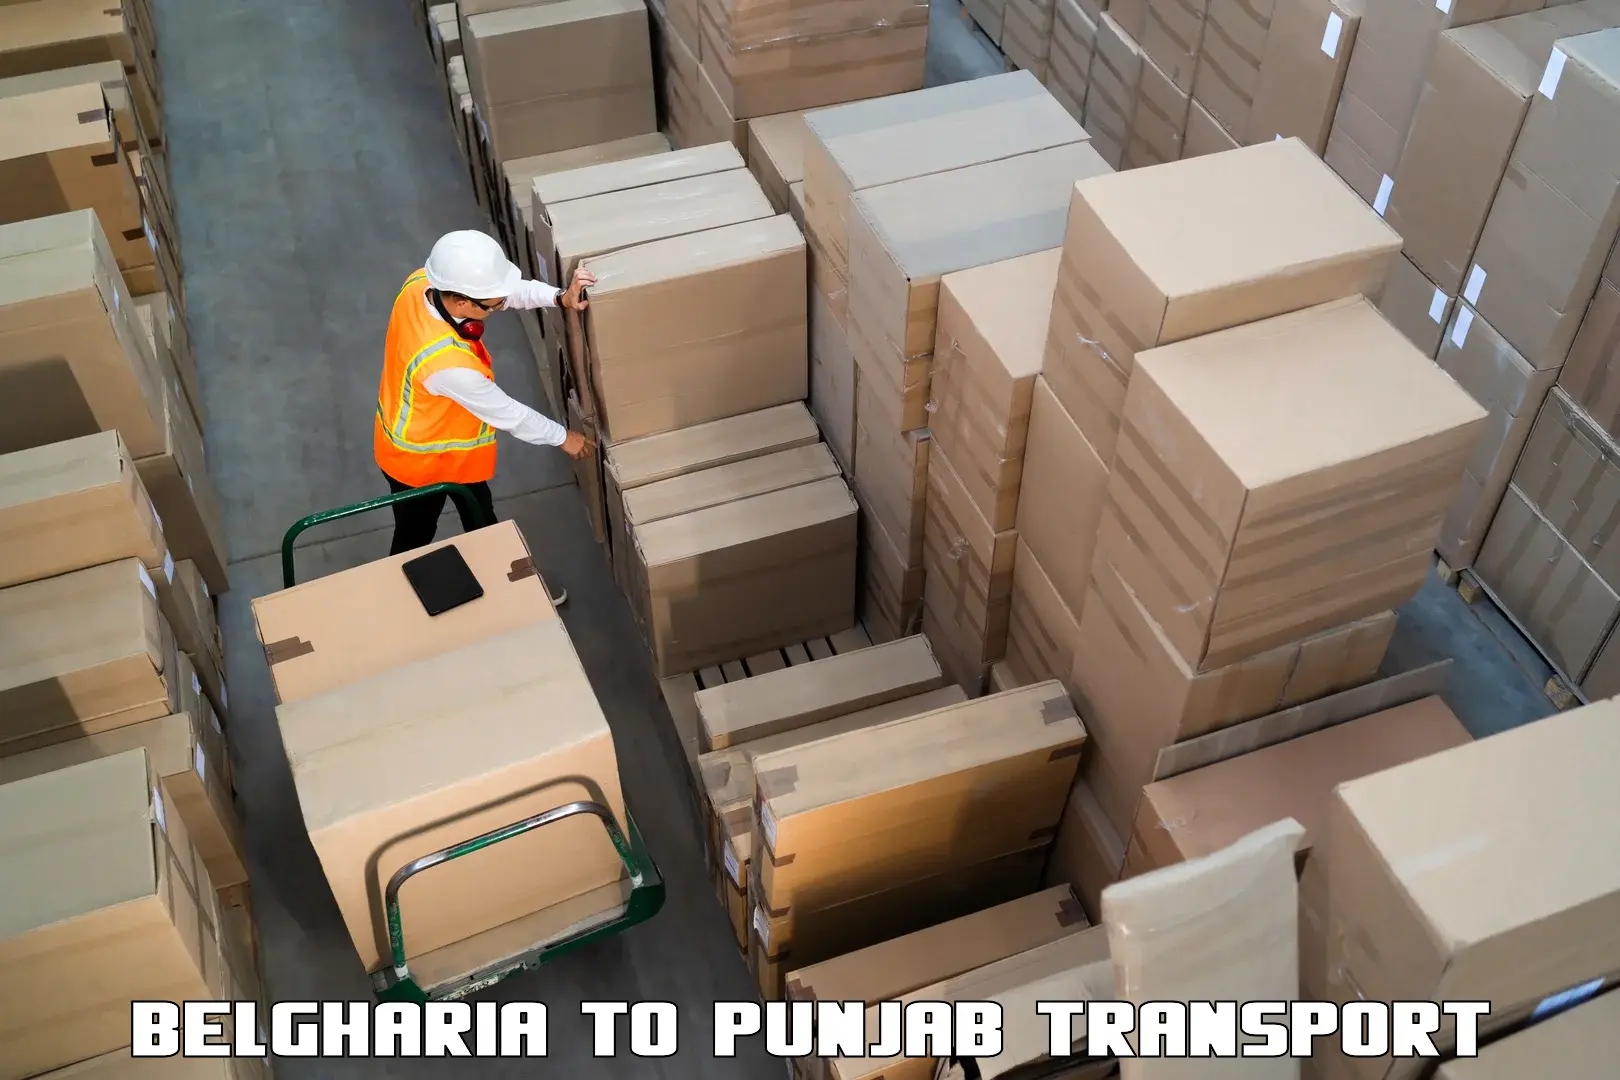 Transport shared services in Belgharia to Mohali